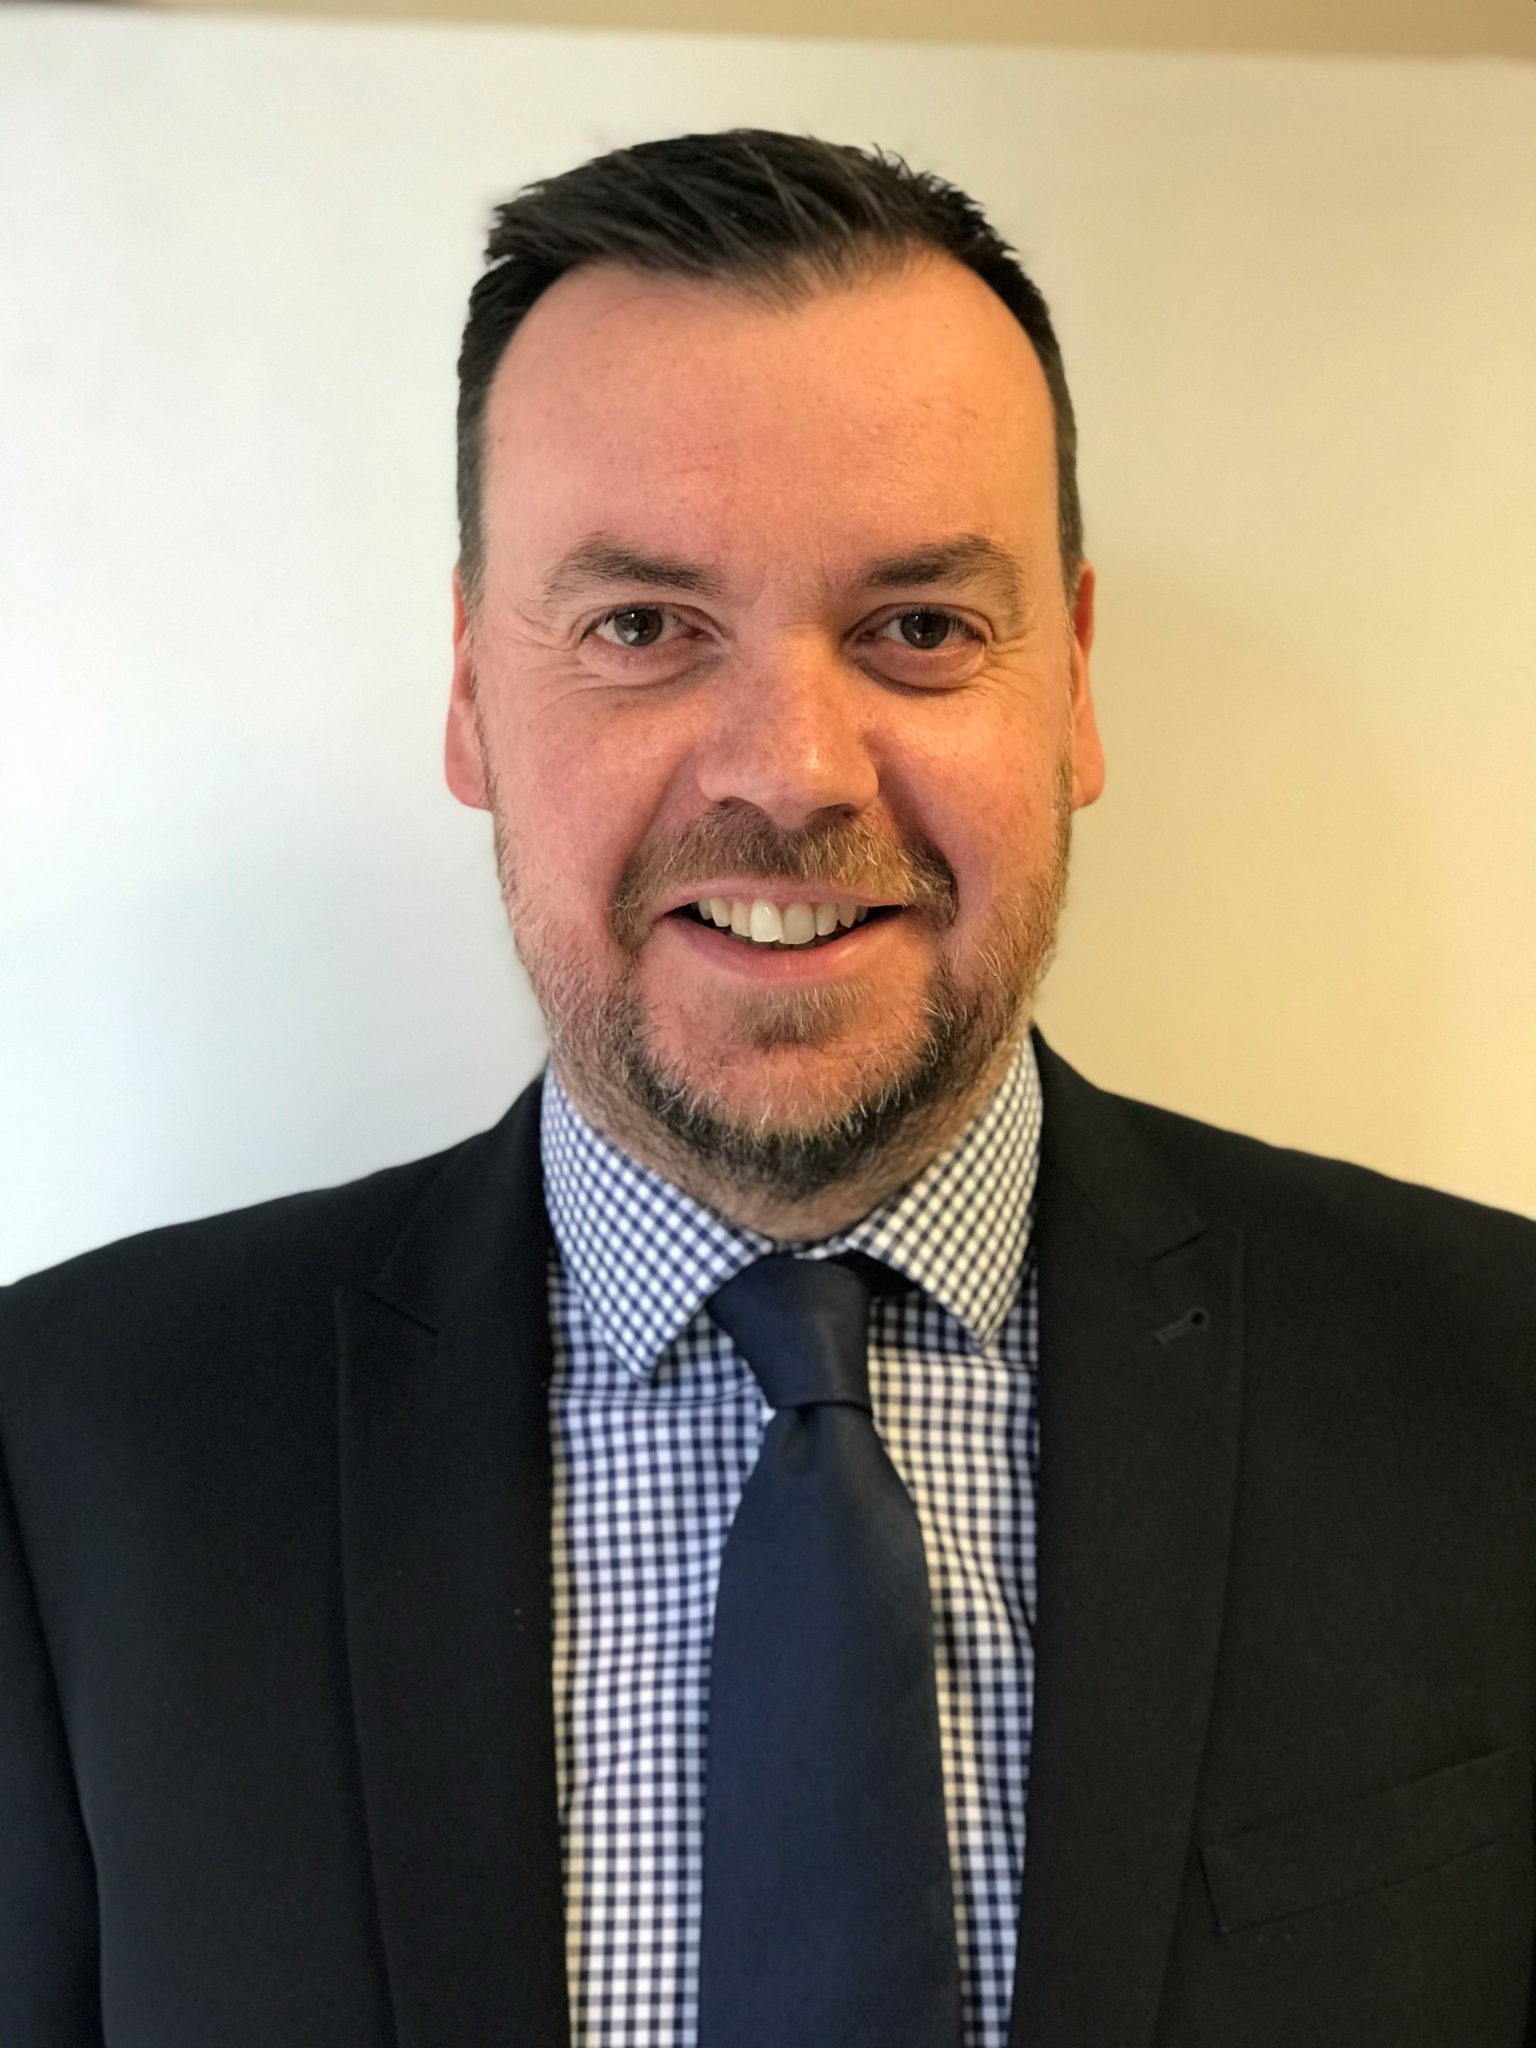 John Rutherford - Meet Our New Property Manager